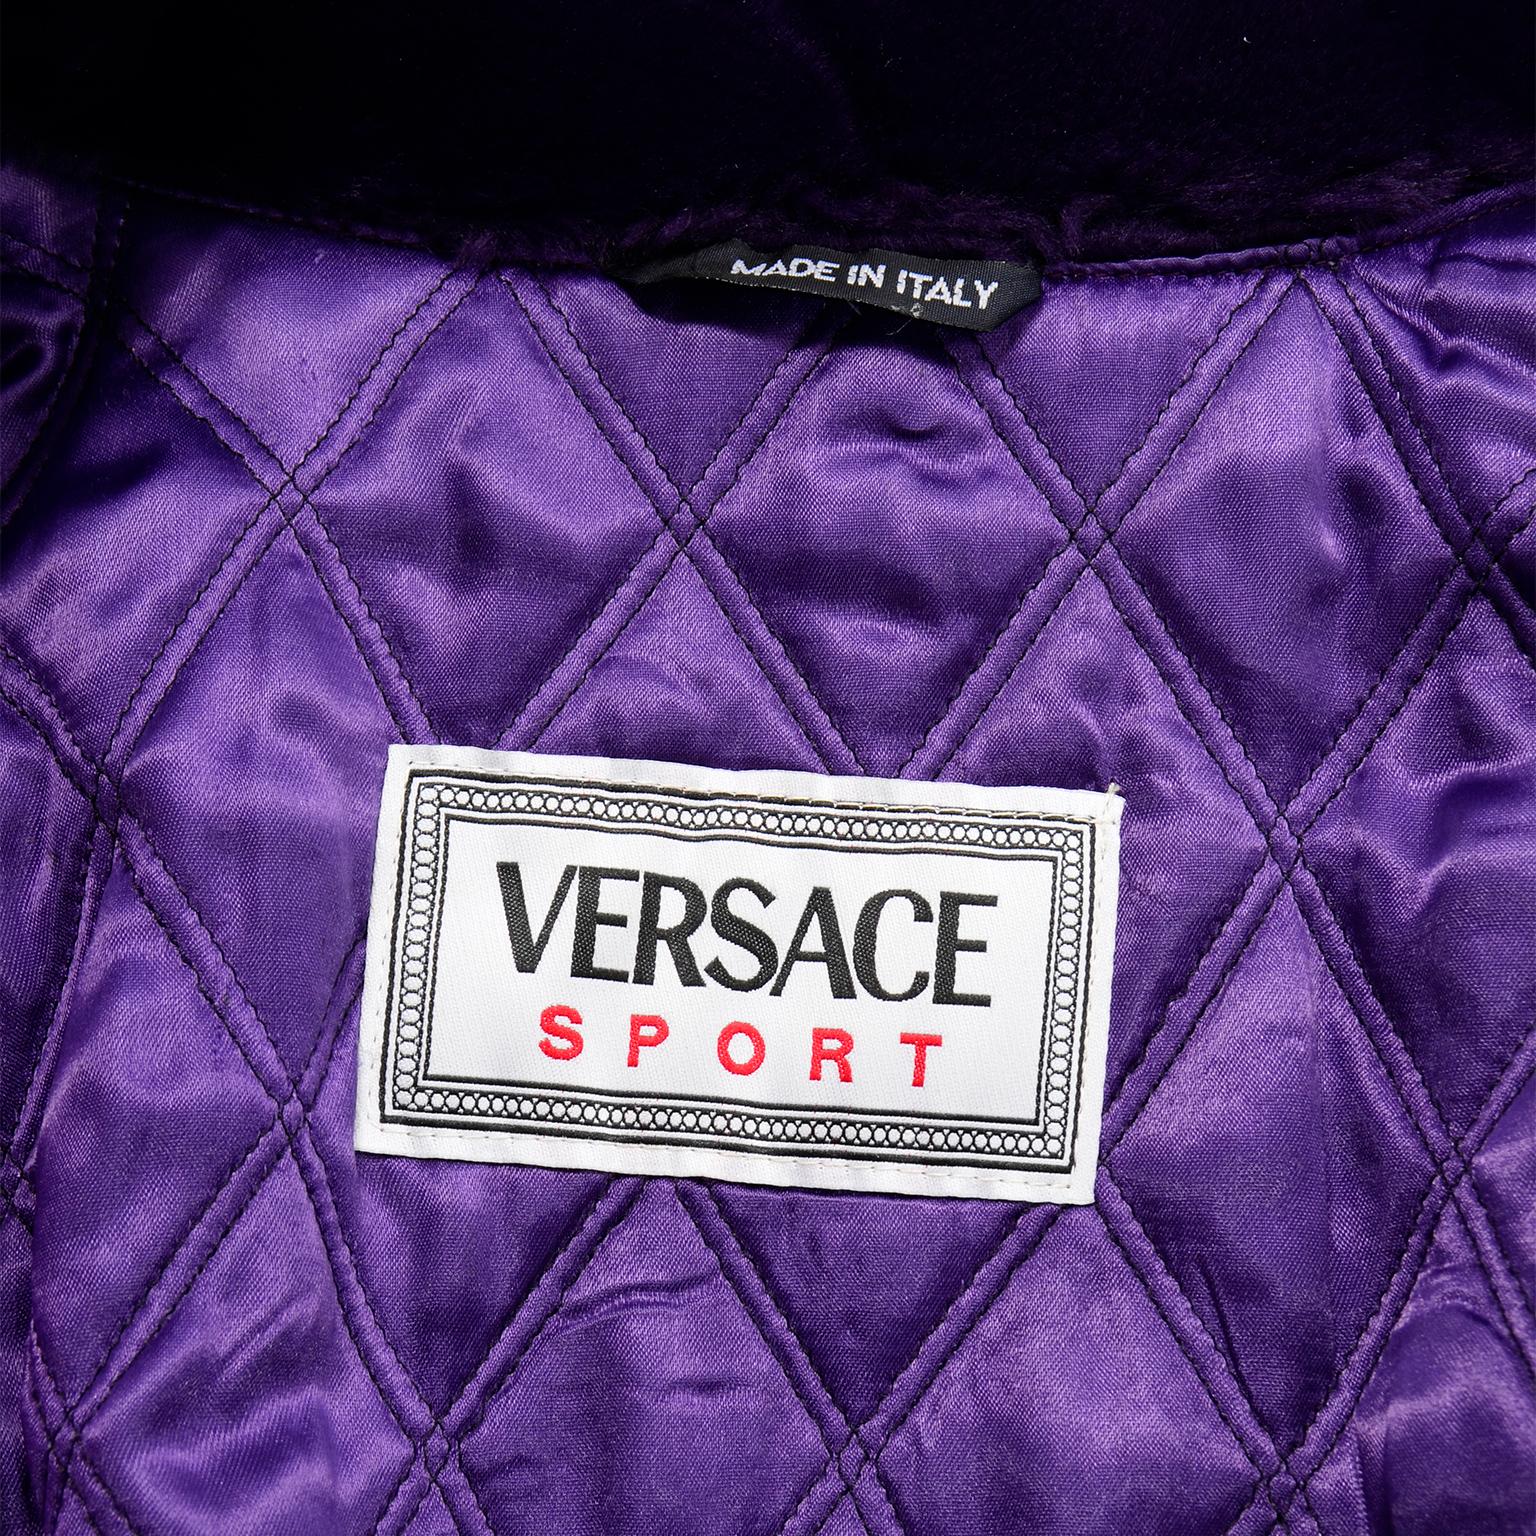 Vintage Versace Colorful  Silk Trench Coat w Purple Faux Fur Cuffs & Collar 9